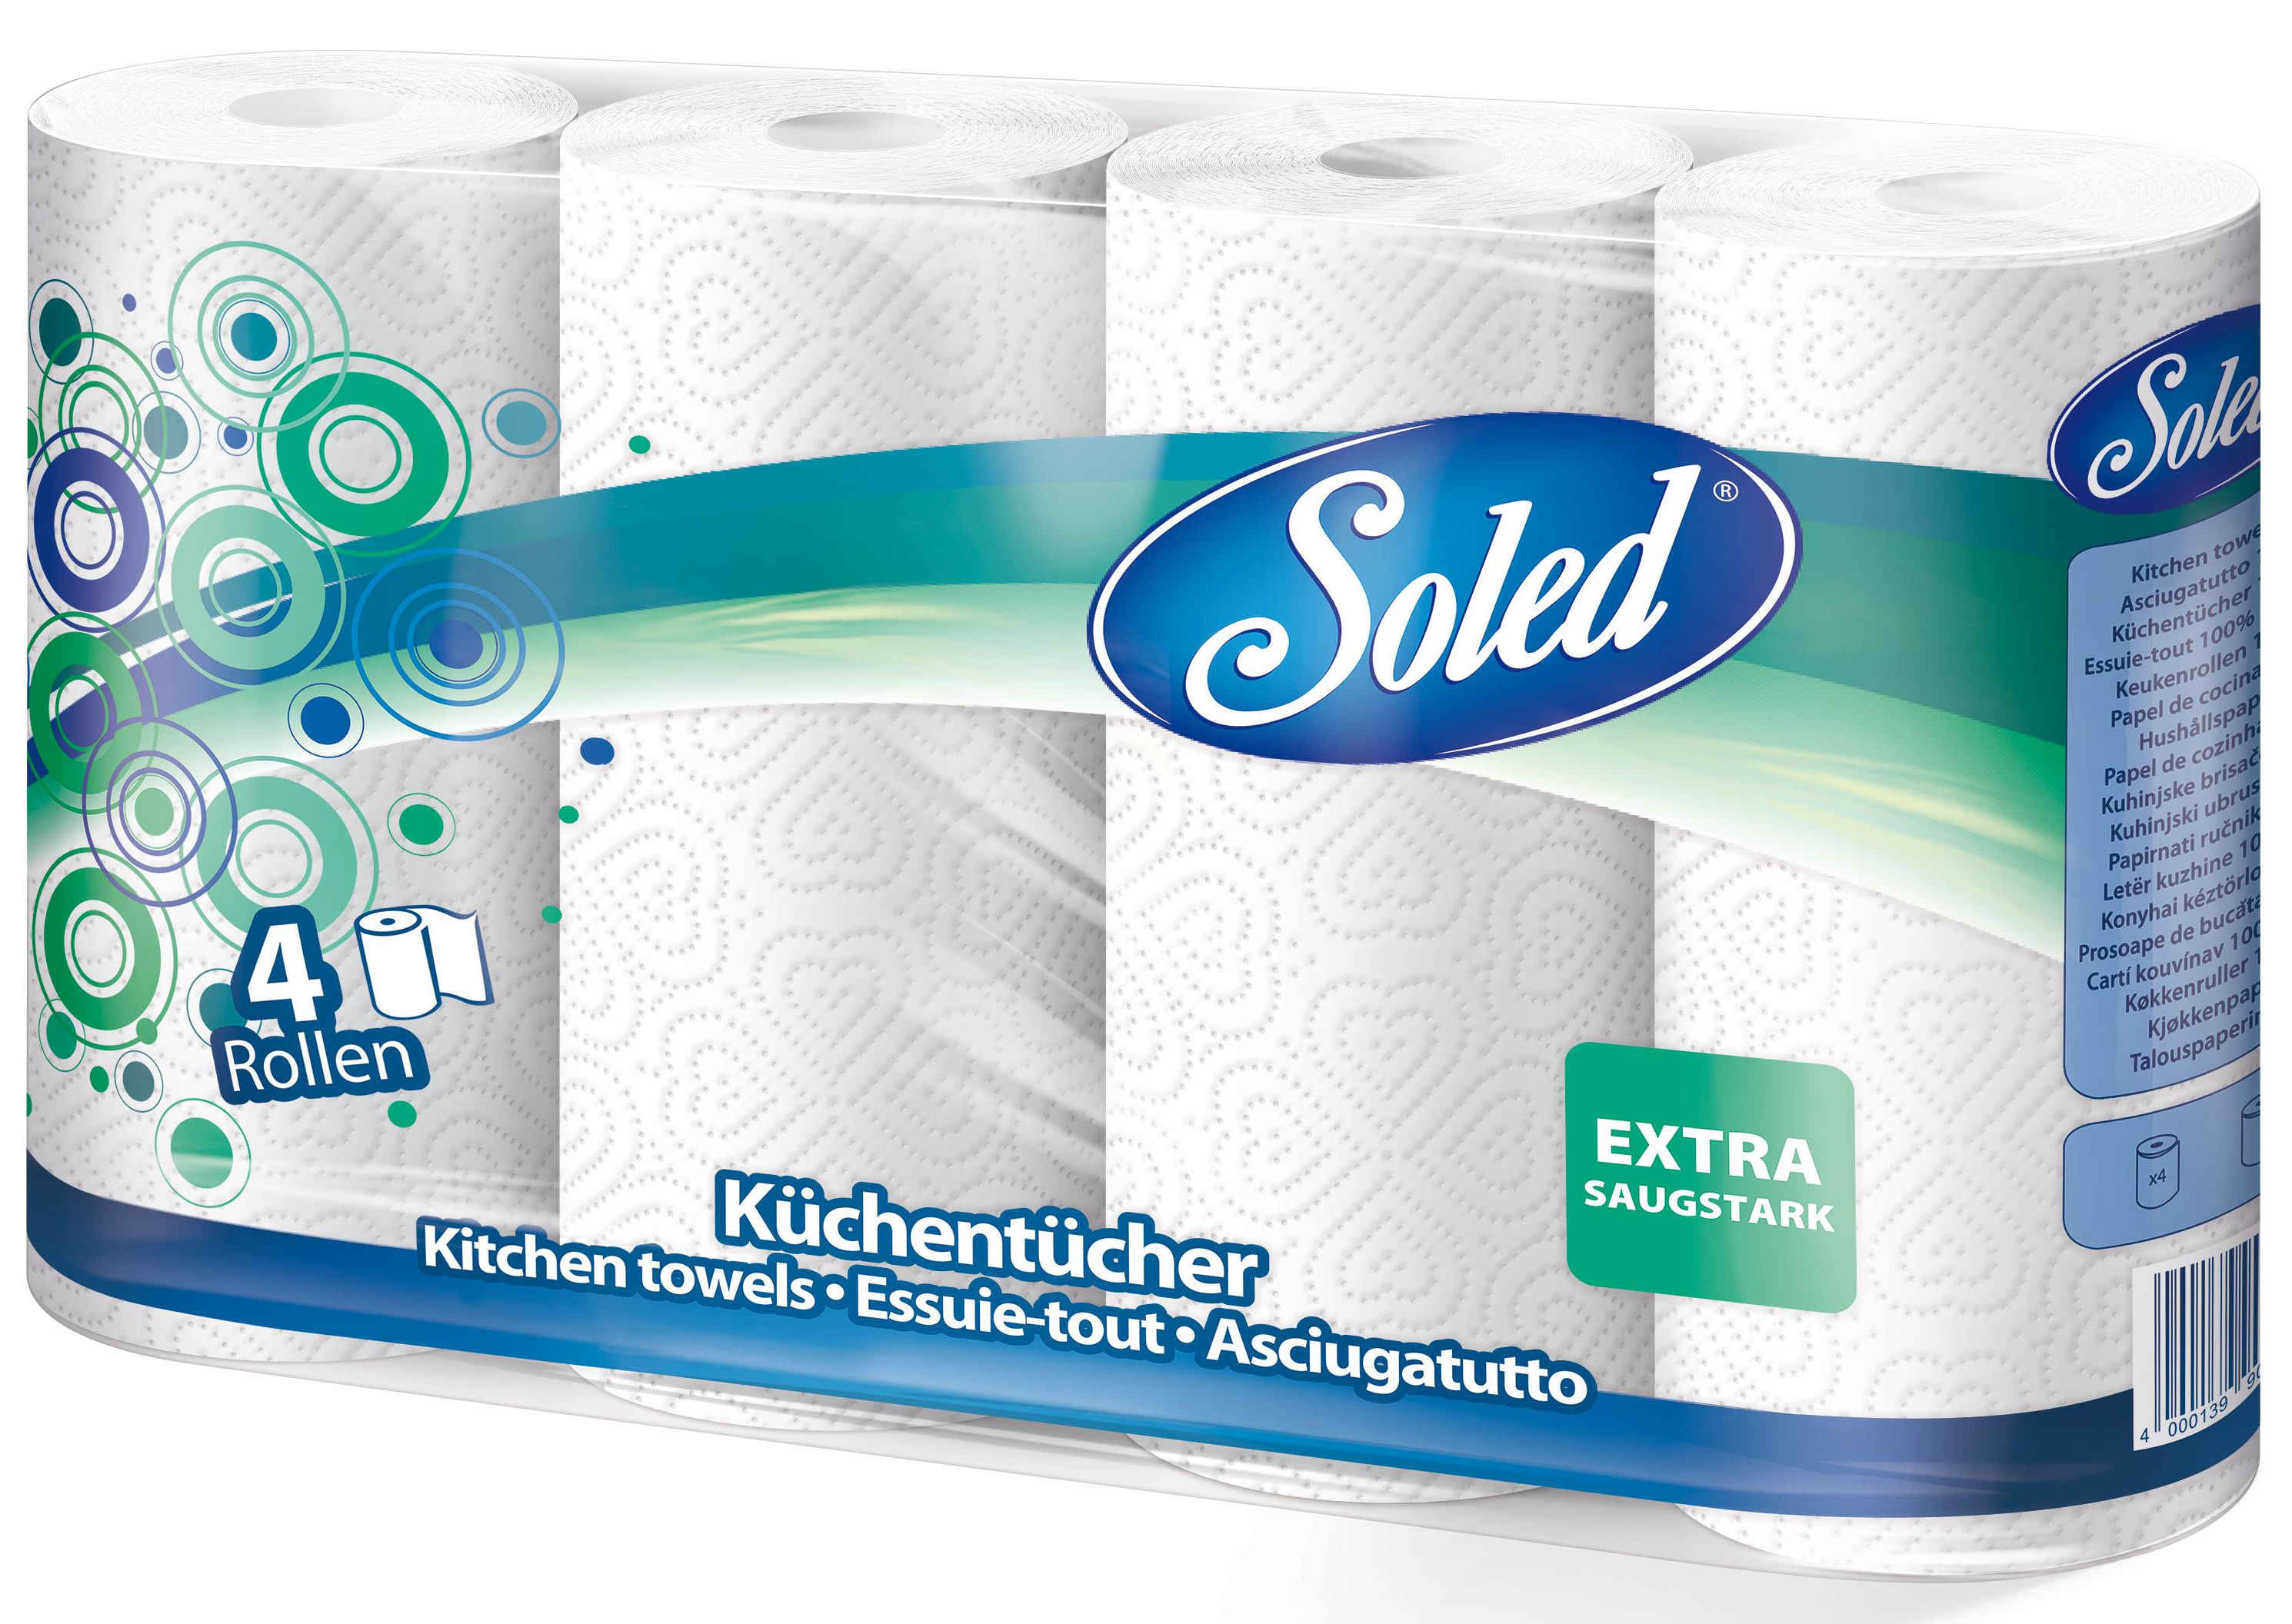 20747 - kitchen rolls 3-ply, pack of 4, 45 sheets